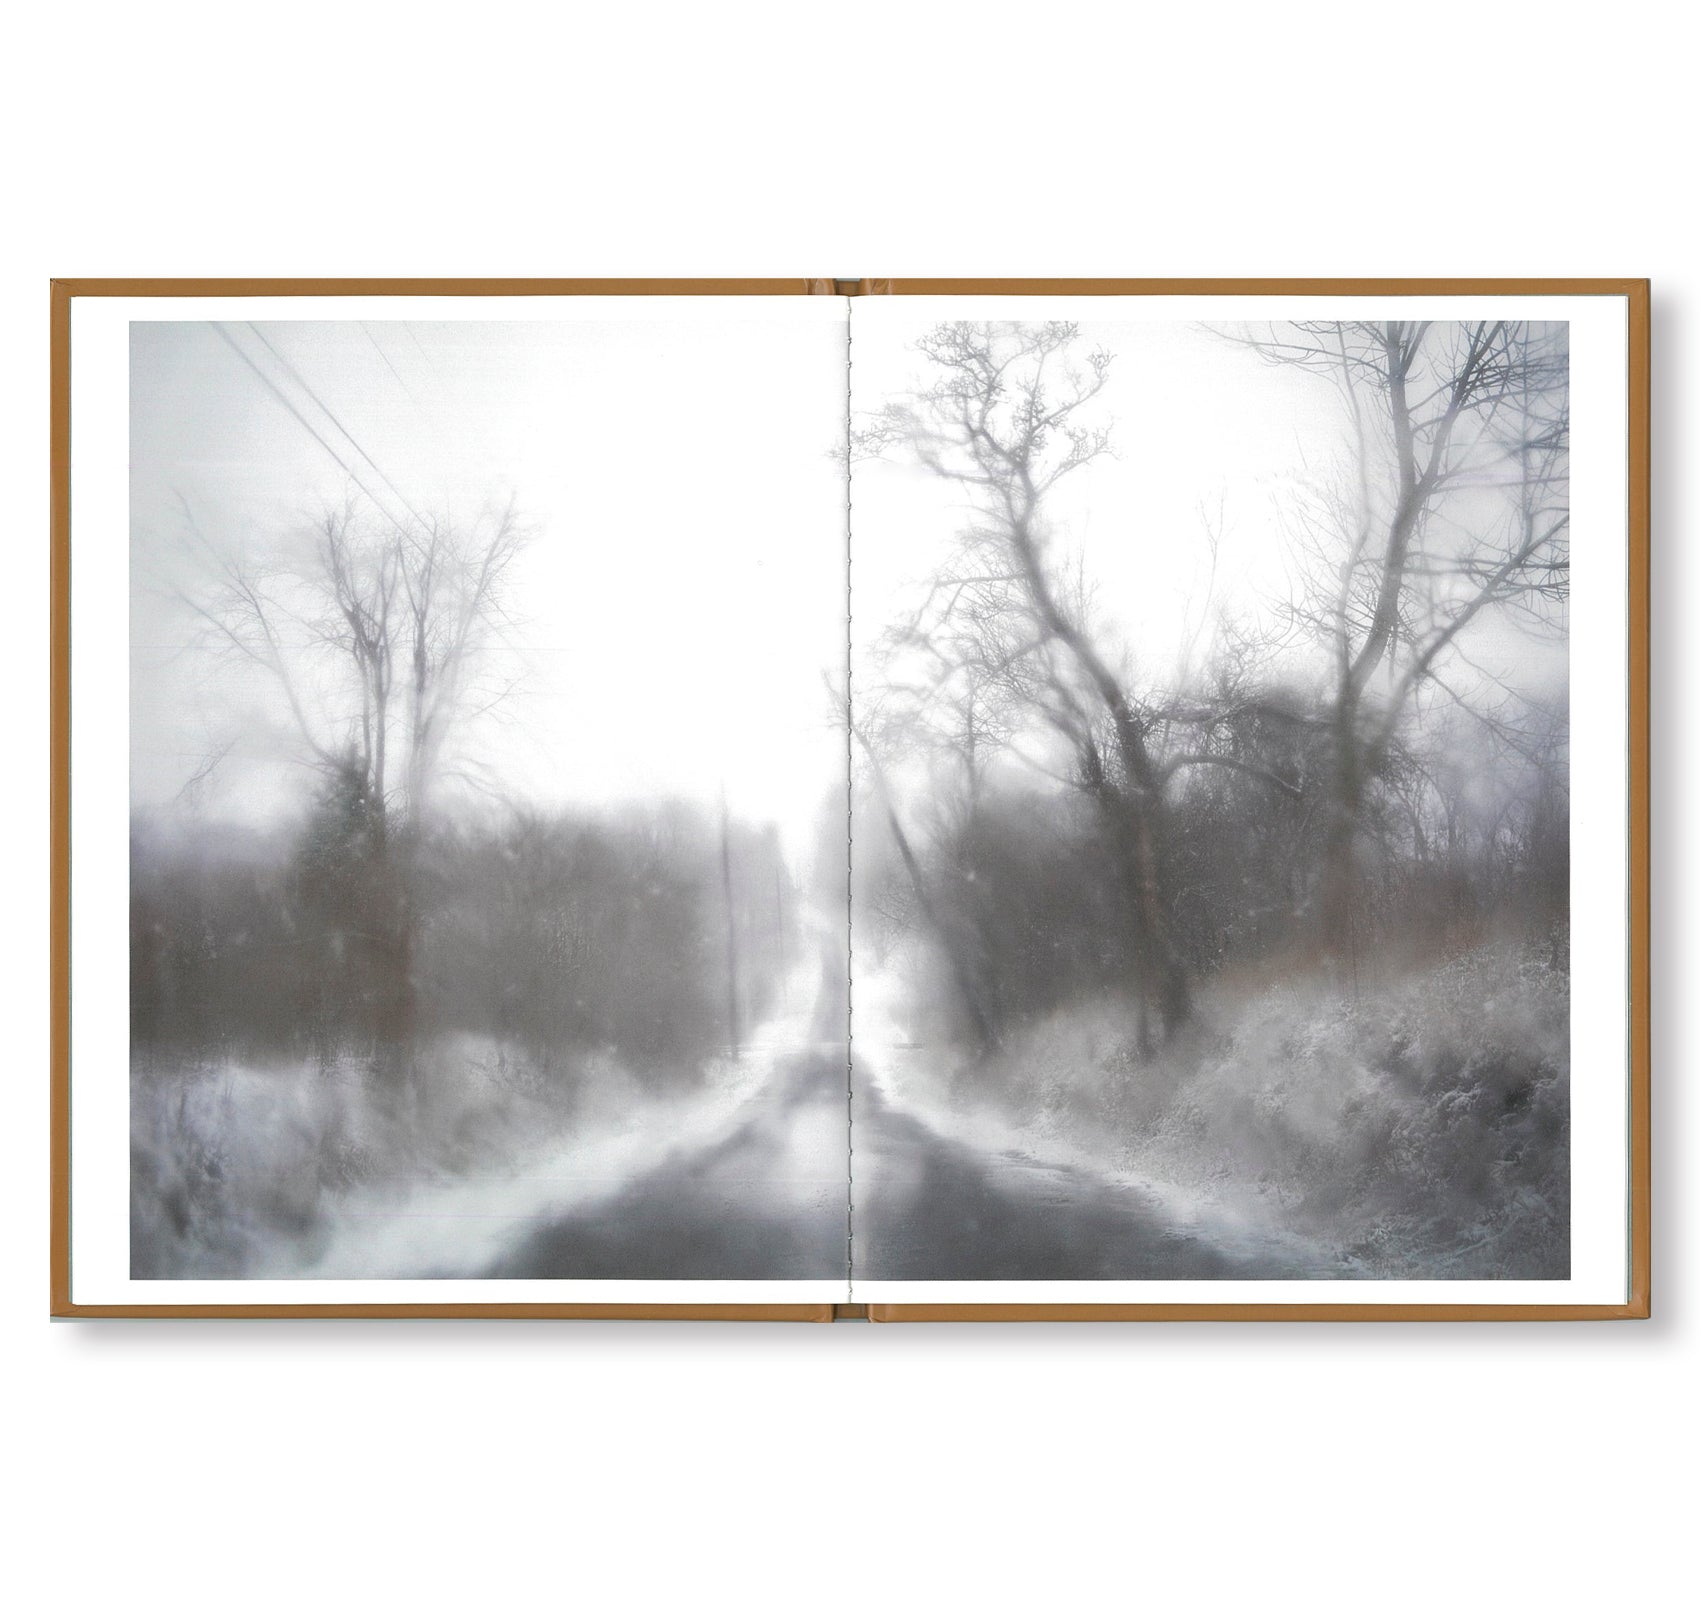 ONE PICTURE BOOK #93: SEASONS ROAD by Todd Hido